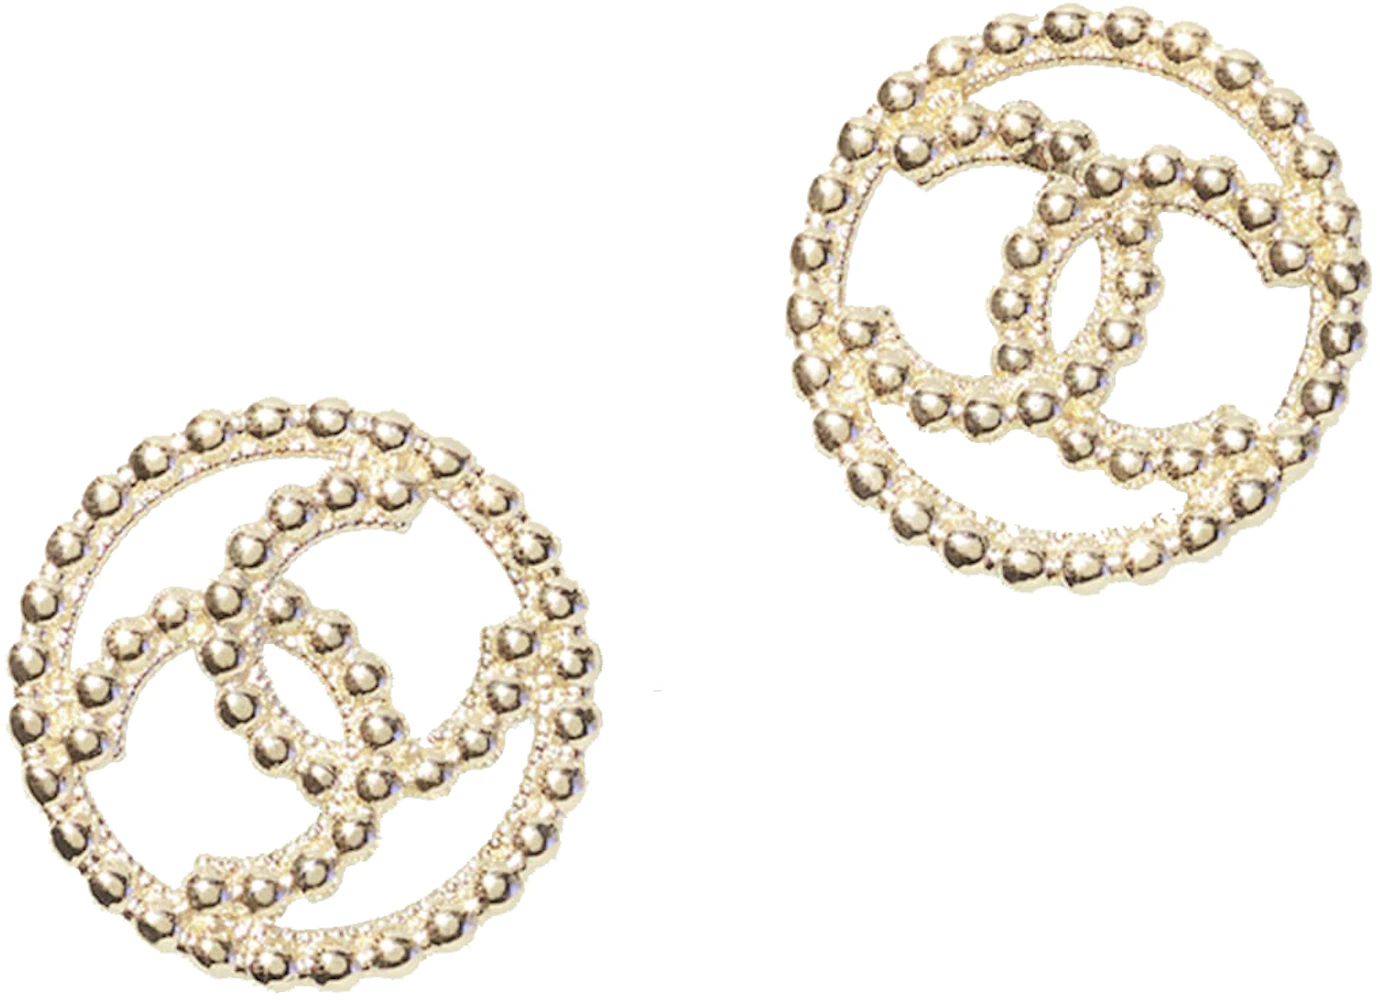 CHANEL CC Number No. 5 Crystal Metal Gold Stud Earrings in Box For Sale at  1stDibs  chanel 5 earrings, chanel crystal cc gold stud earrings gold, chanel  crystal stud earrings